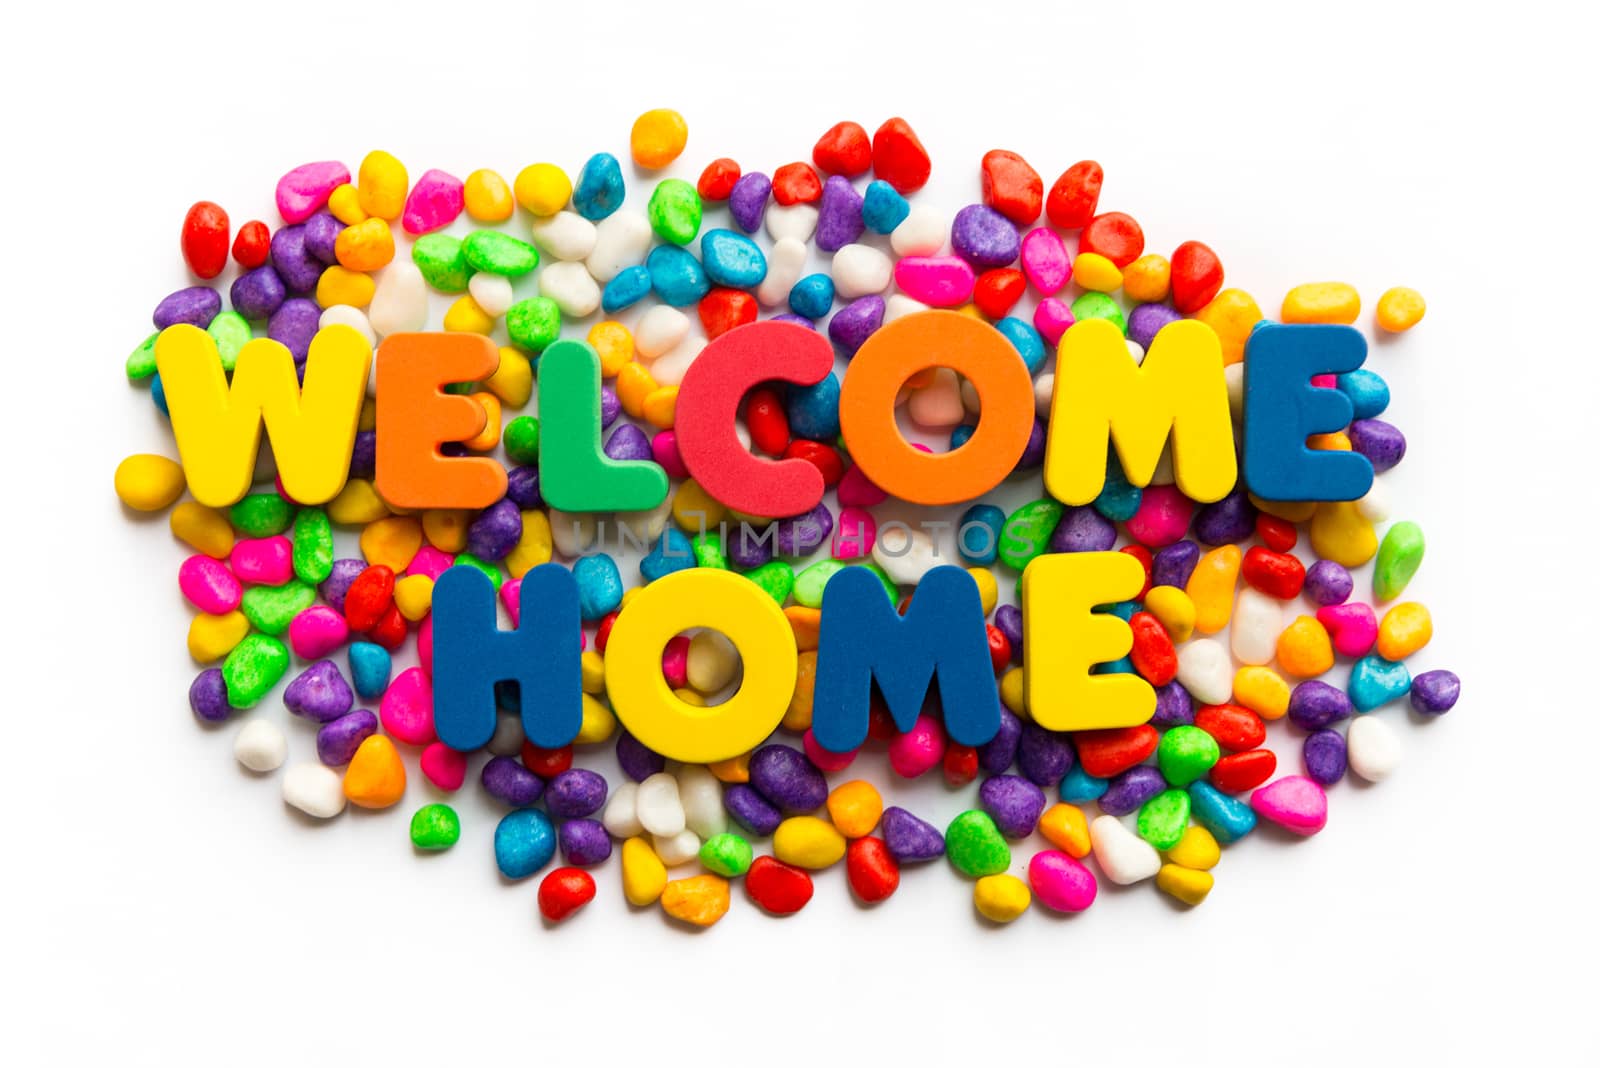 welcome home word in colorful stone